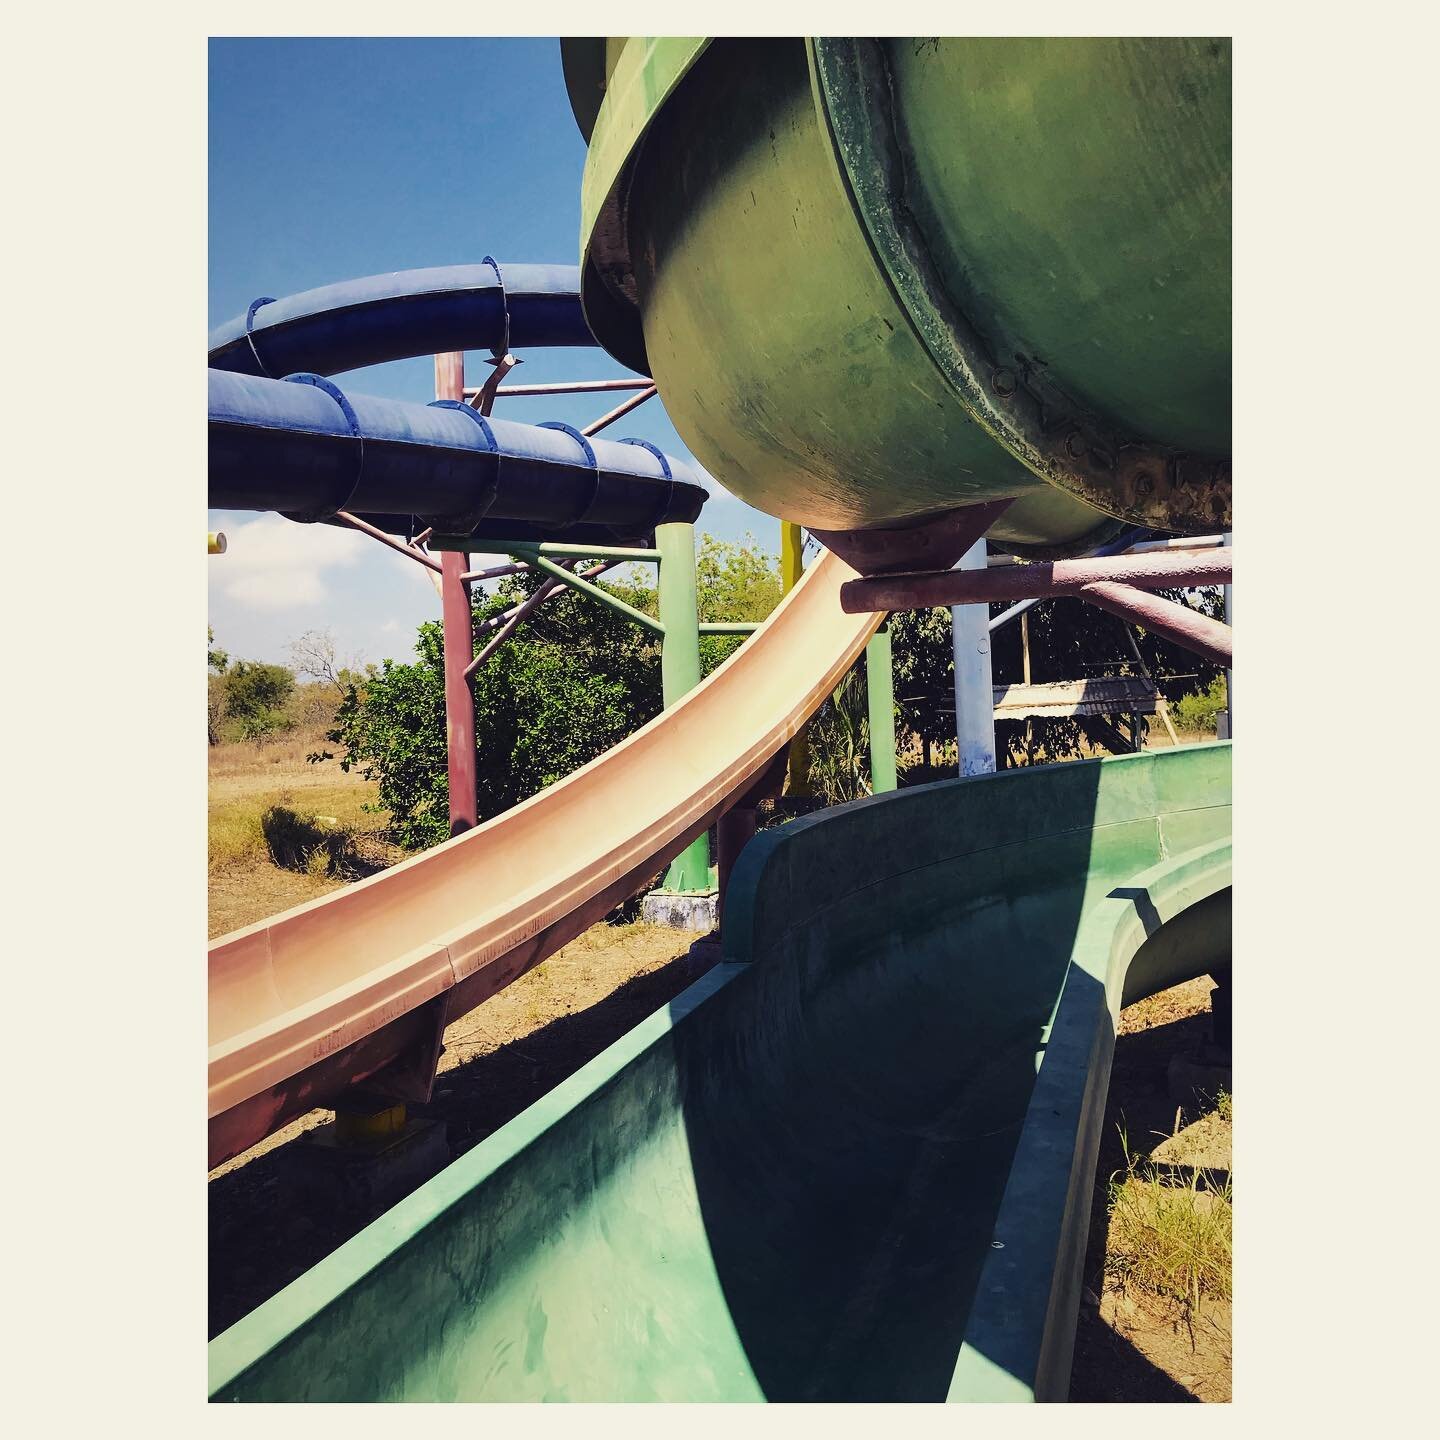 Totally unrelated to food. A Pure indulgent shot from the depths of Oaxaca. An abandoned waterpark so bizarre, not a tourist in sight but a waterpark in the middle of the bush no population nearby &hellip; obviously disused but a great joint for a ph